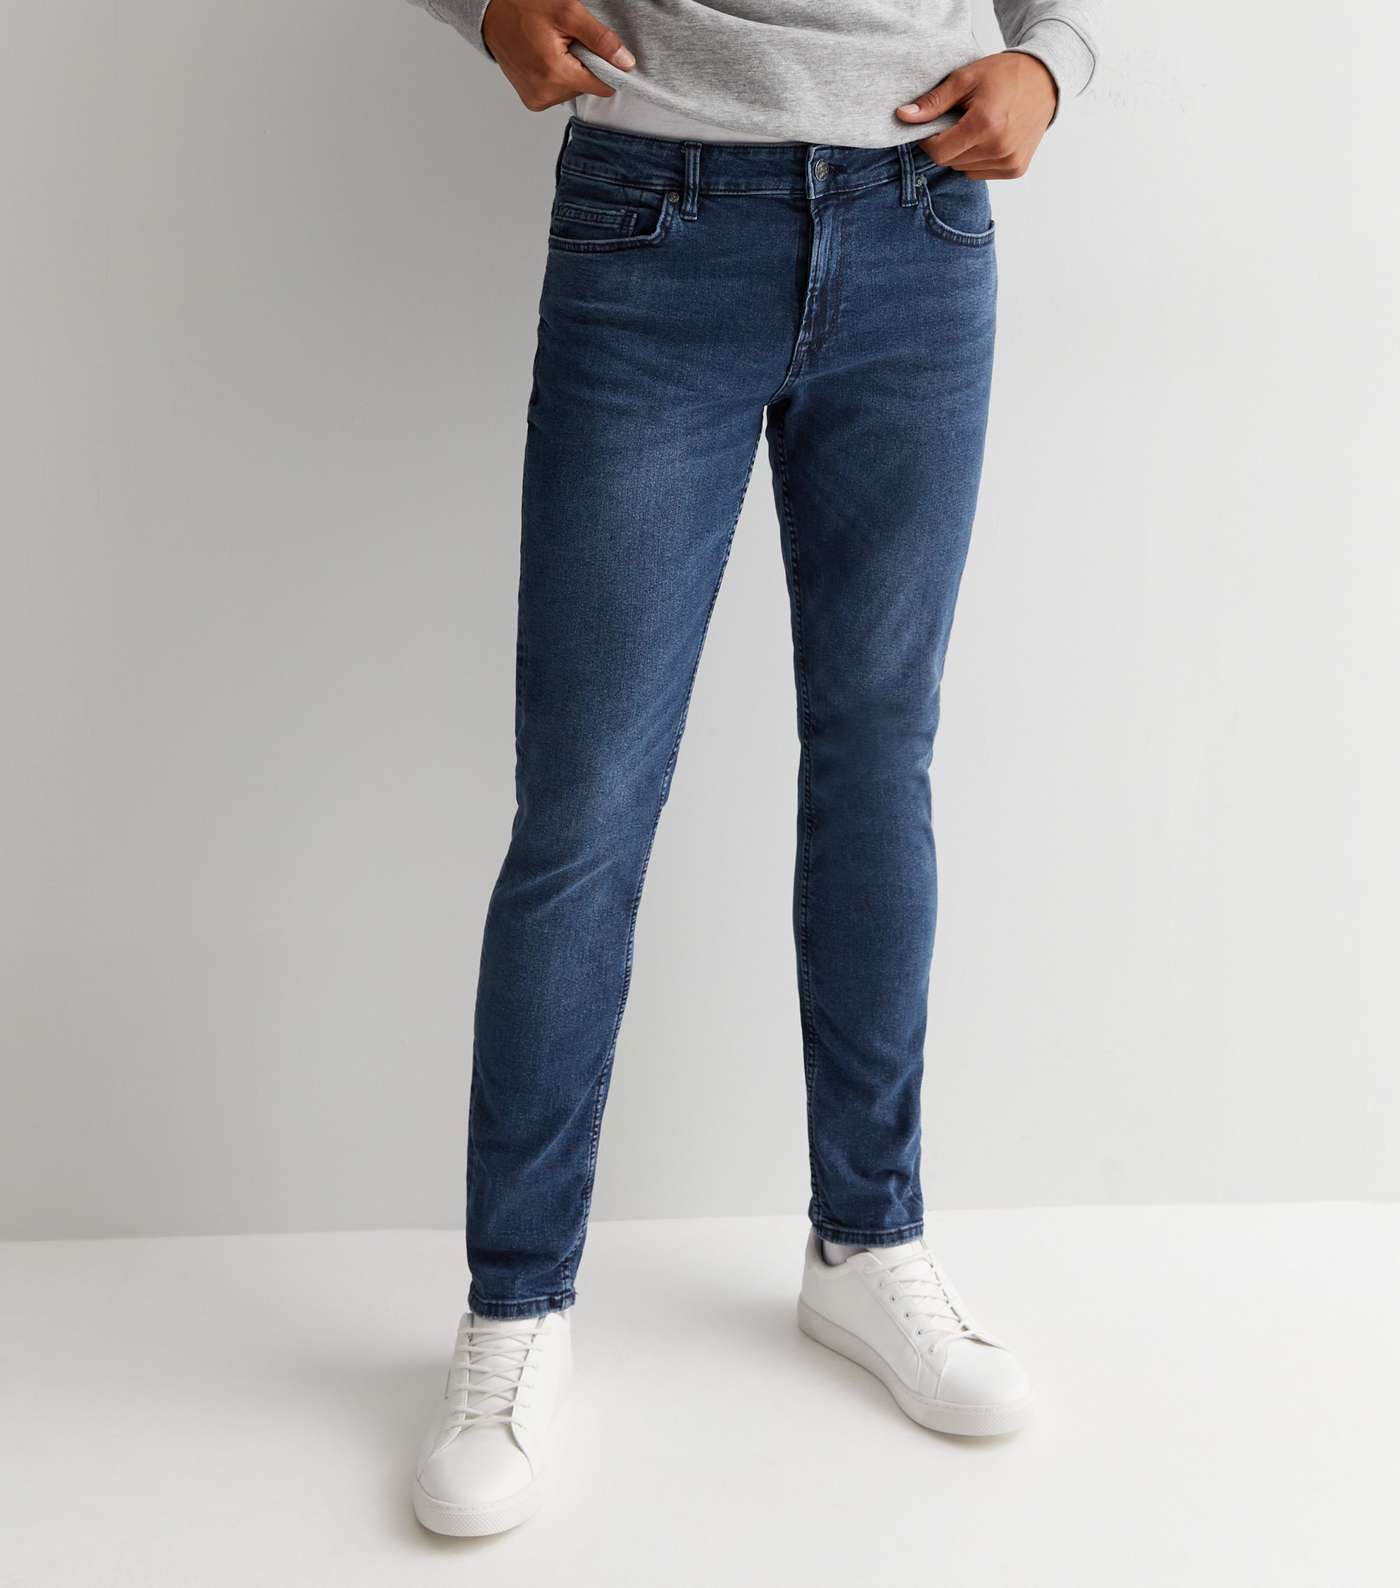 Only & Sons Blue Rinse Wash Slim Fit Jeans Image 3